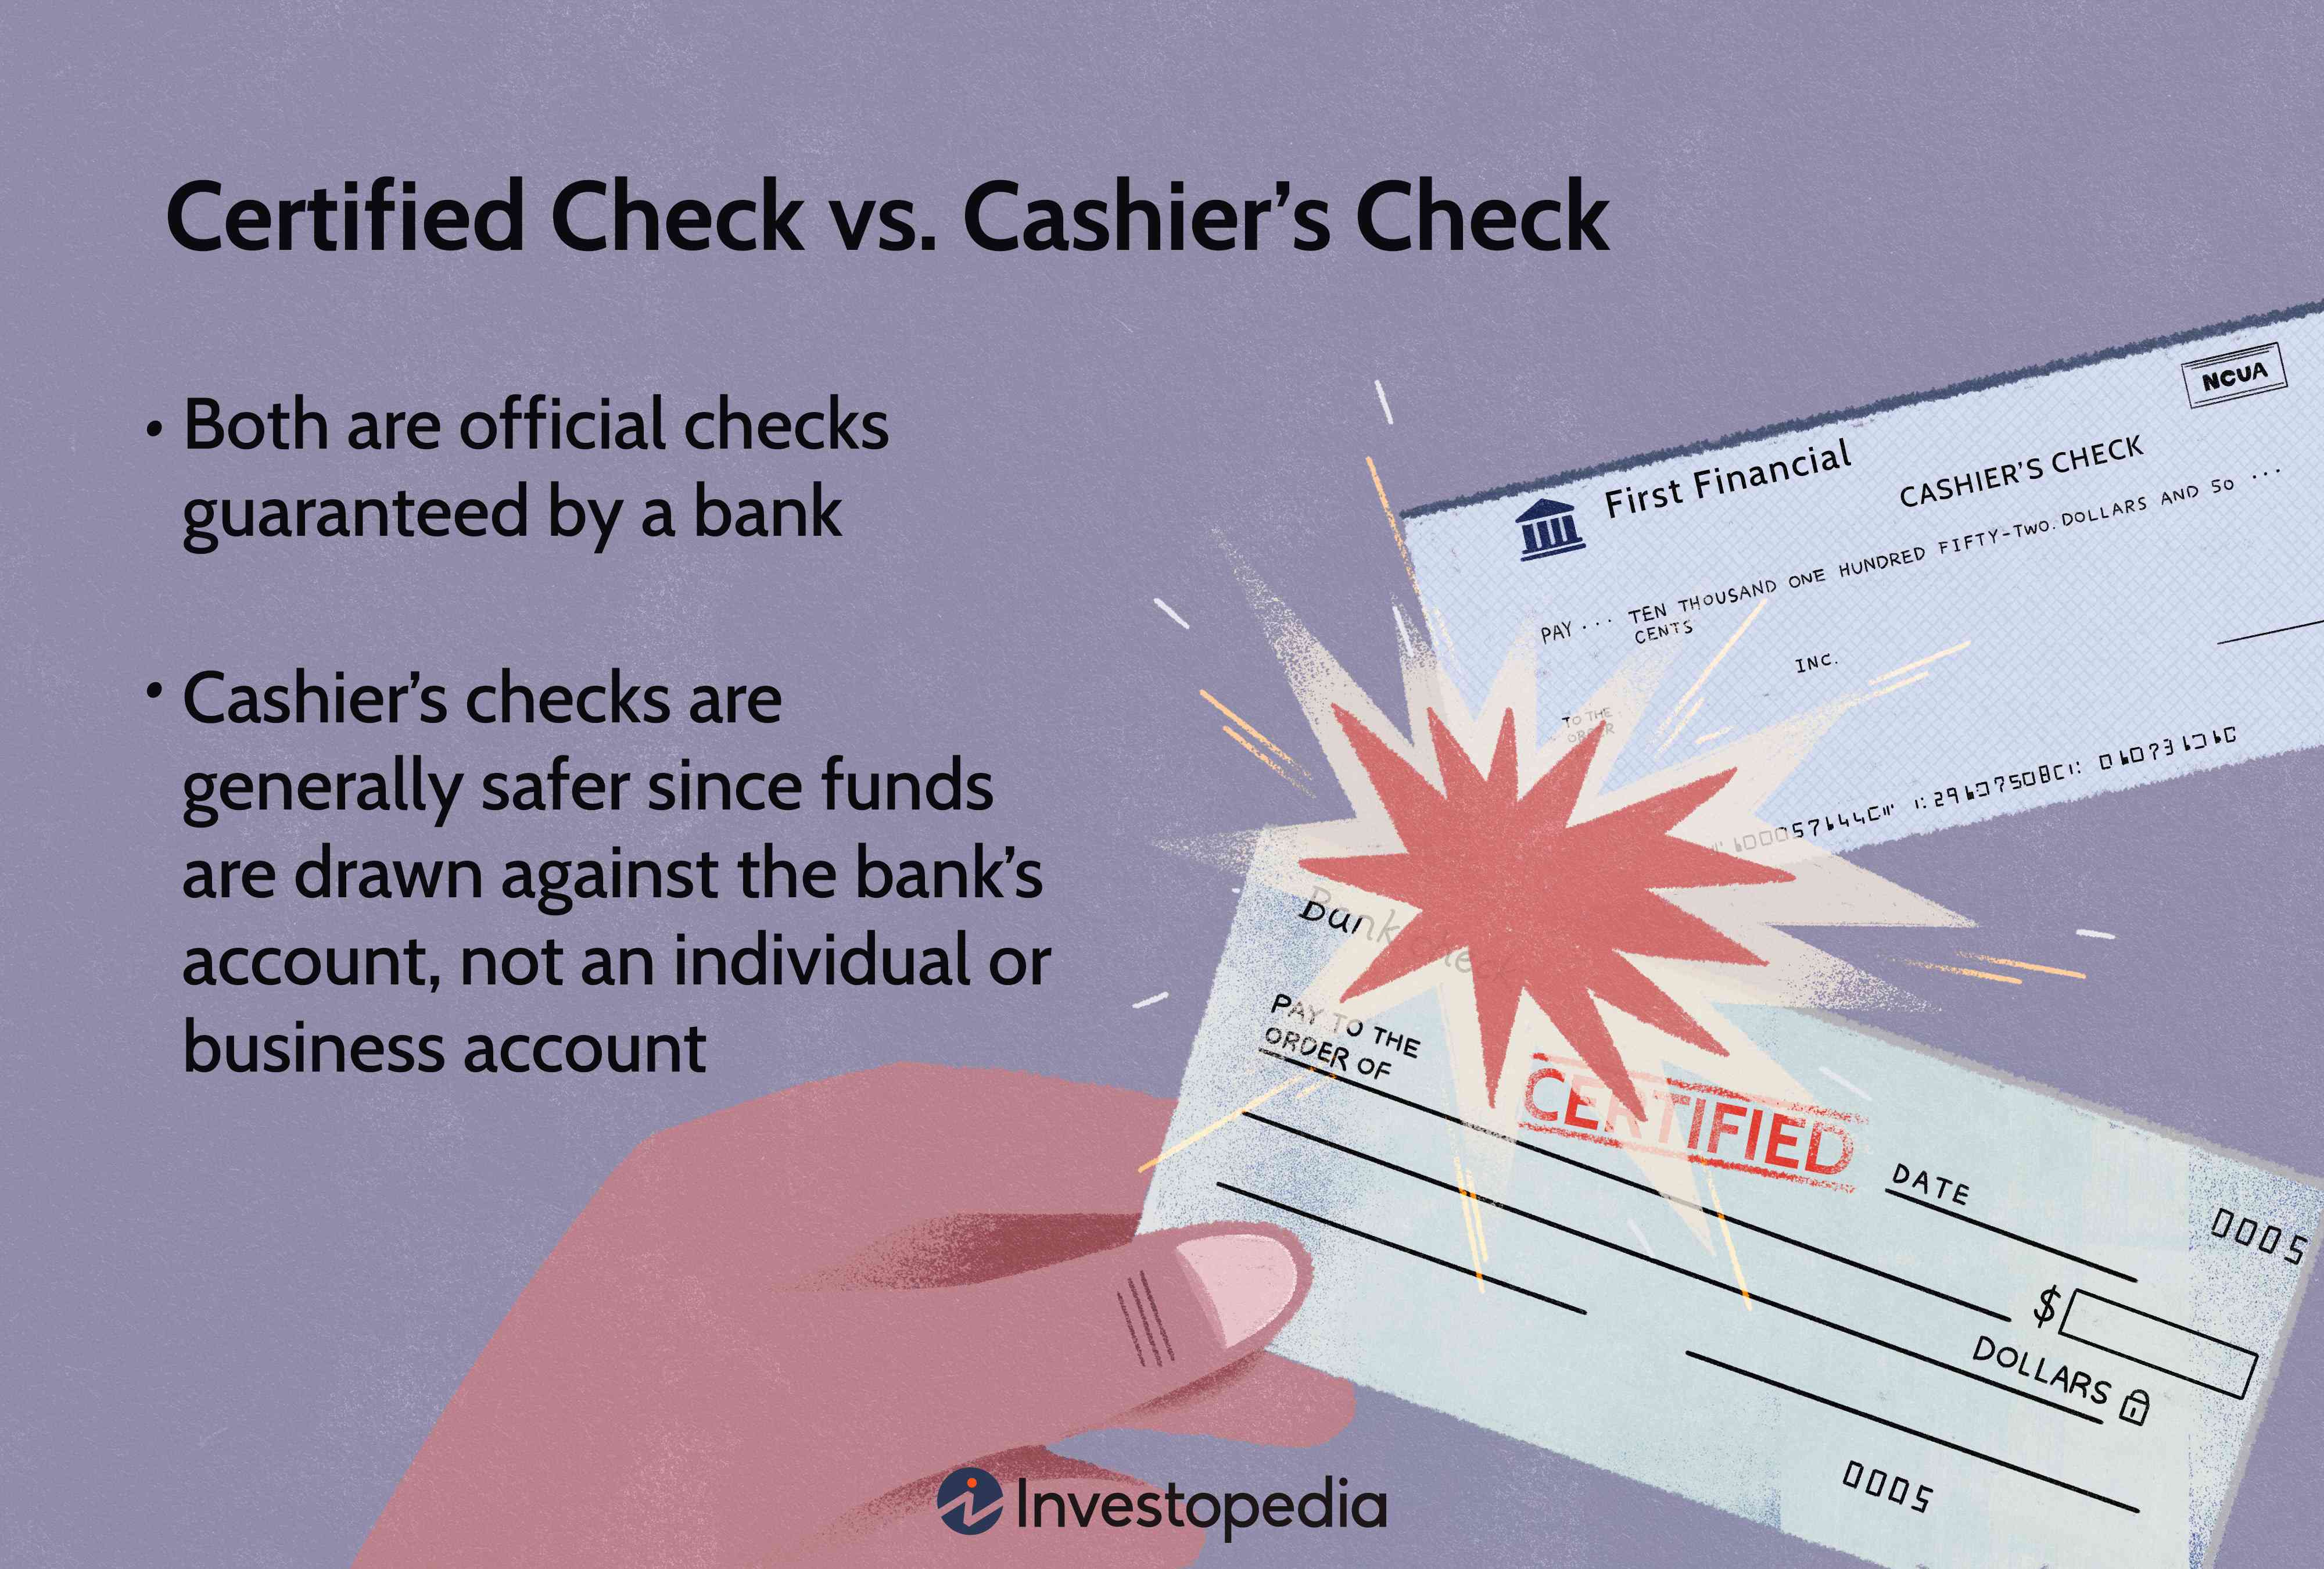 Certified Check vs. Cashiers Check